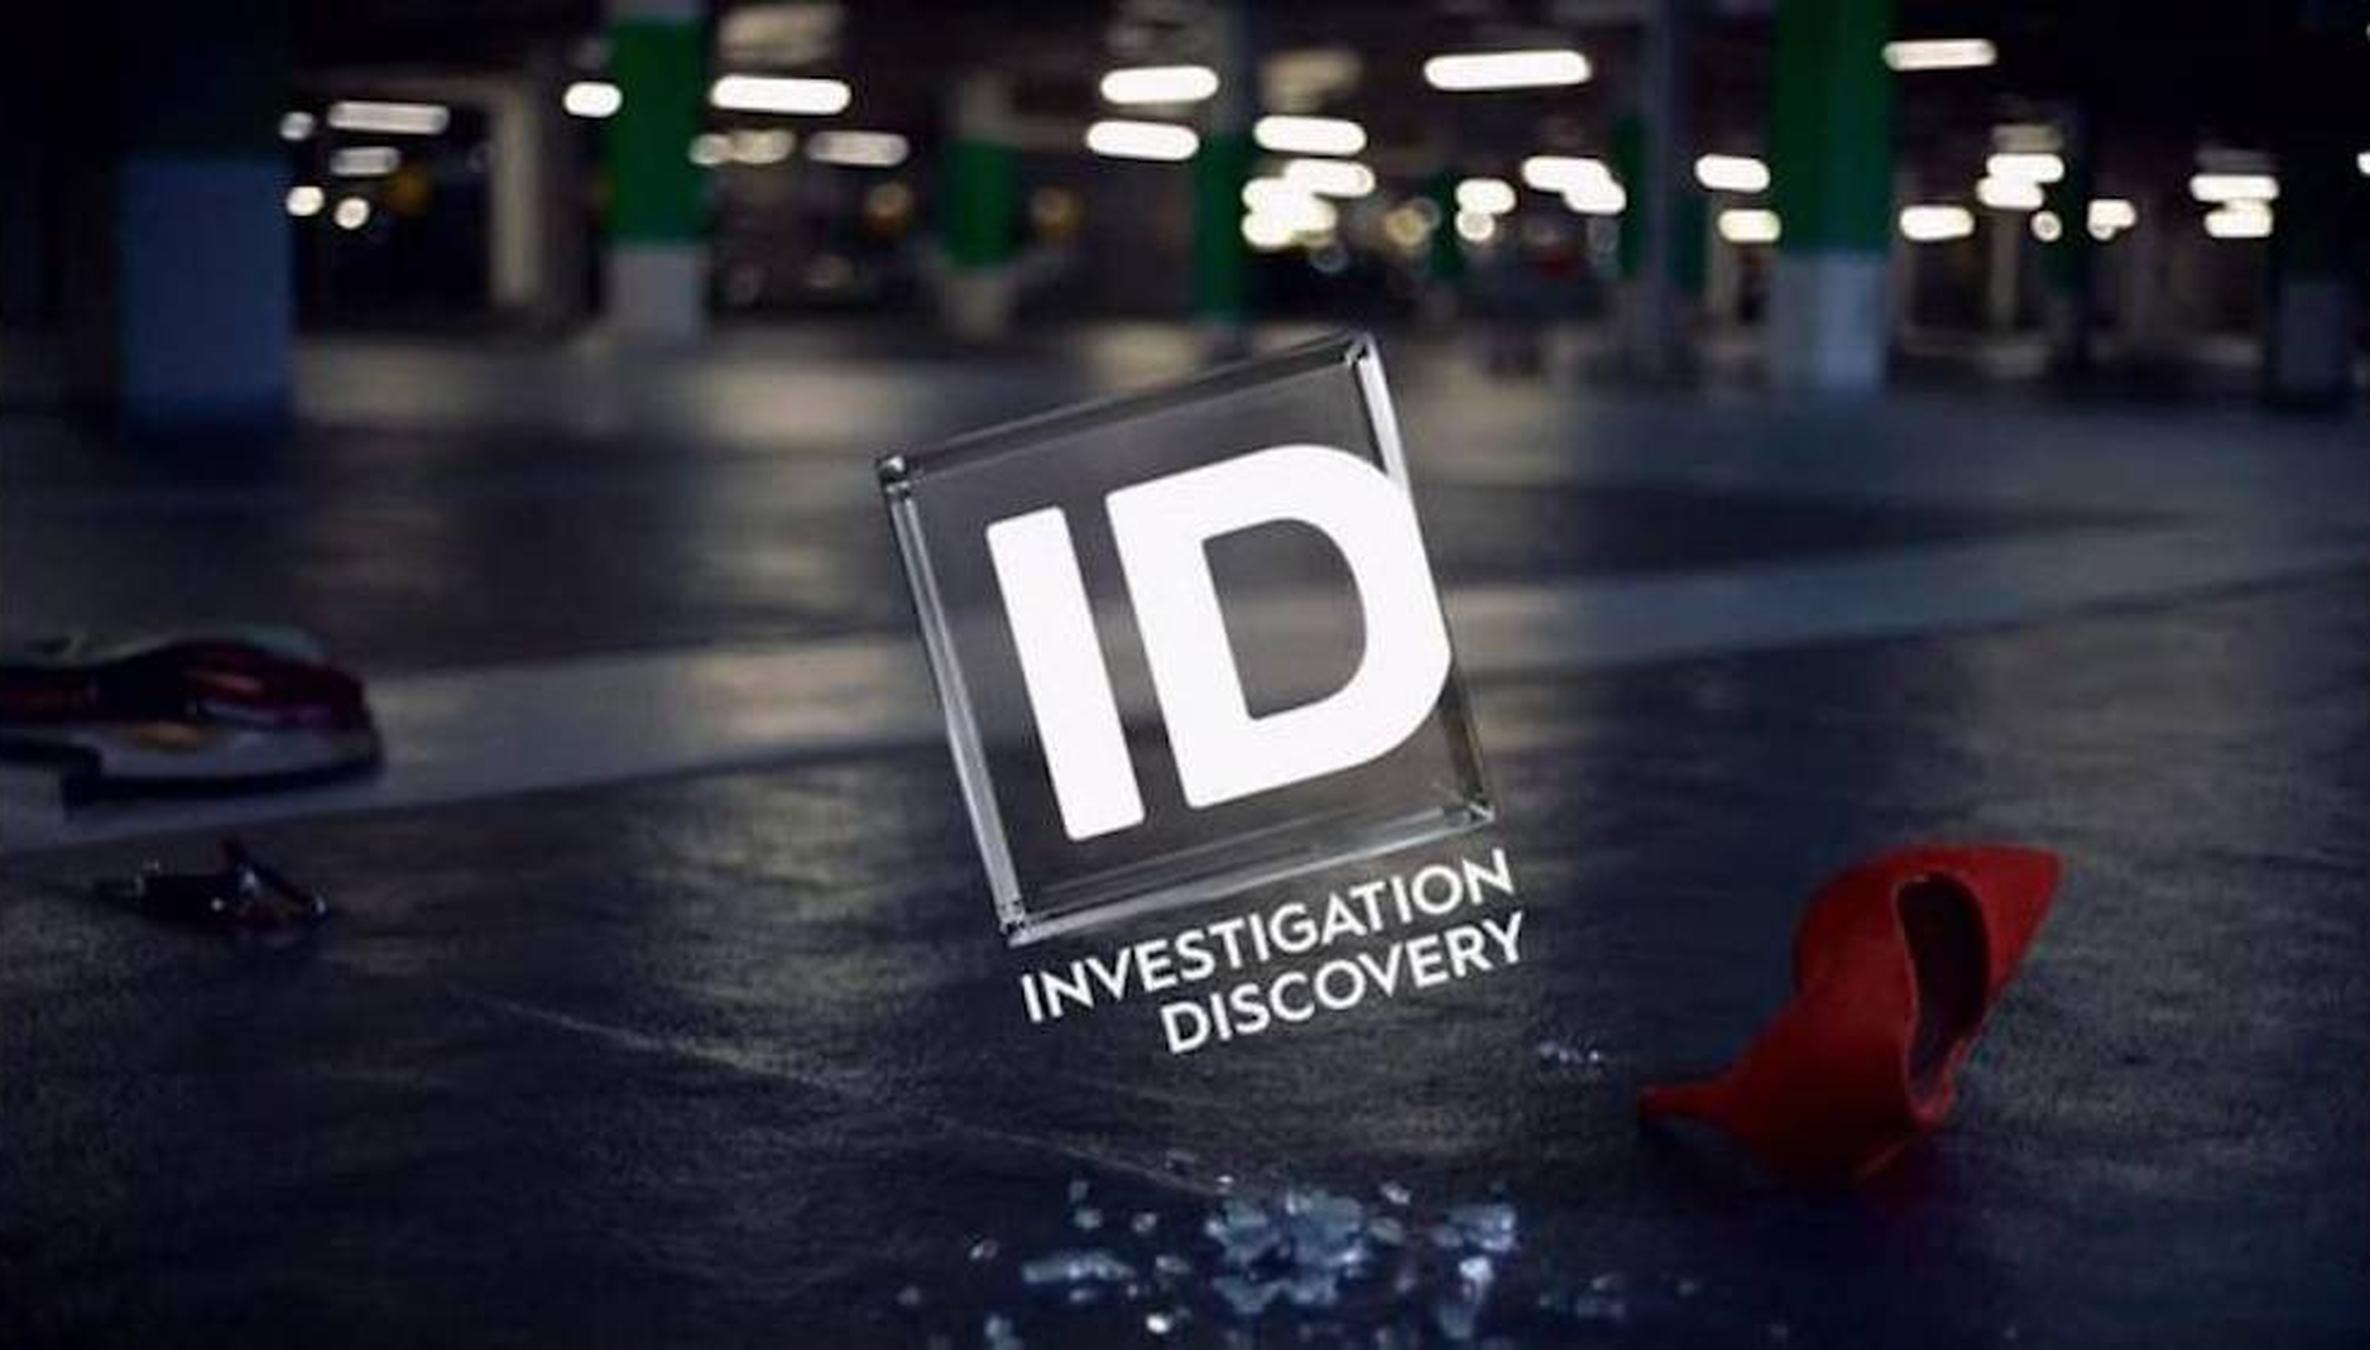 How To Watch Investigation Discovery On Spectrum TV